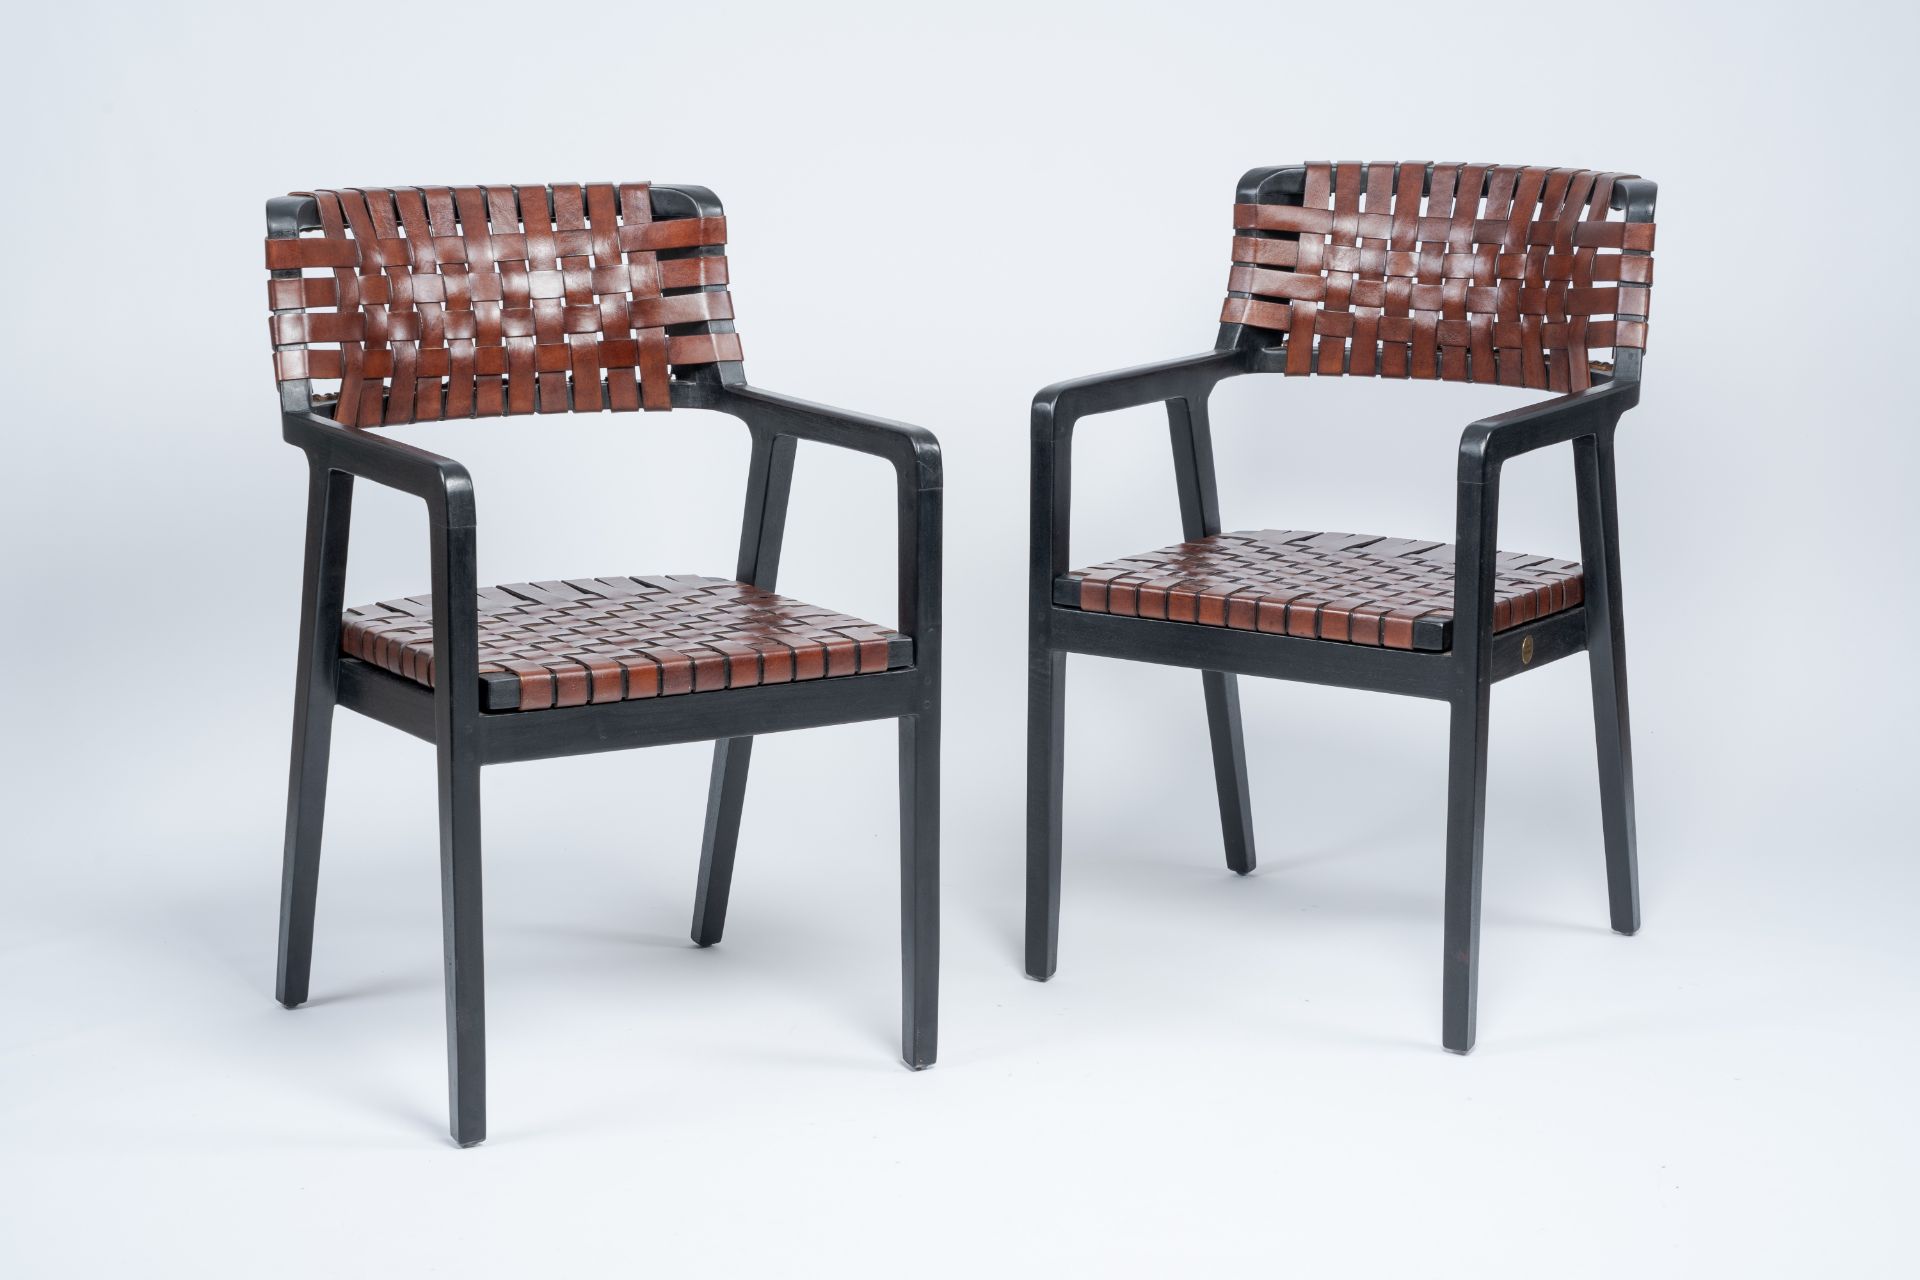 Olivier De Schrijver (1958): A pair of Brighton armchairs in double-sided brown leather and black ti